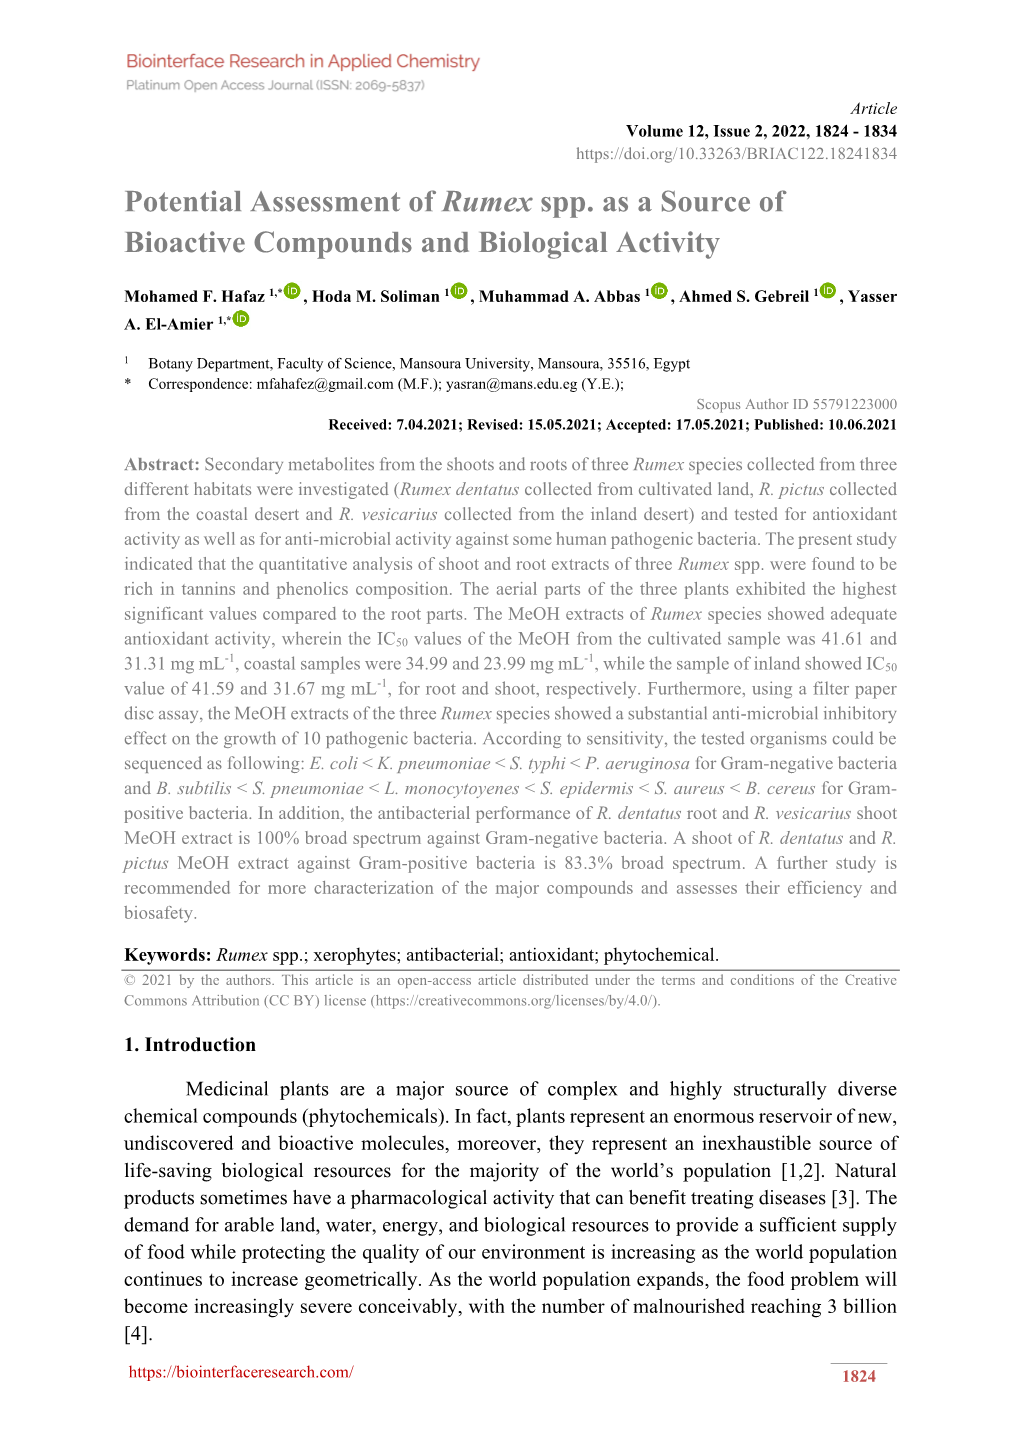 Potential Assessment of Rumex Spp. As a Source of Bioactive Compounds and Biological Activity